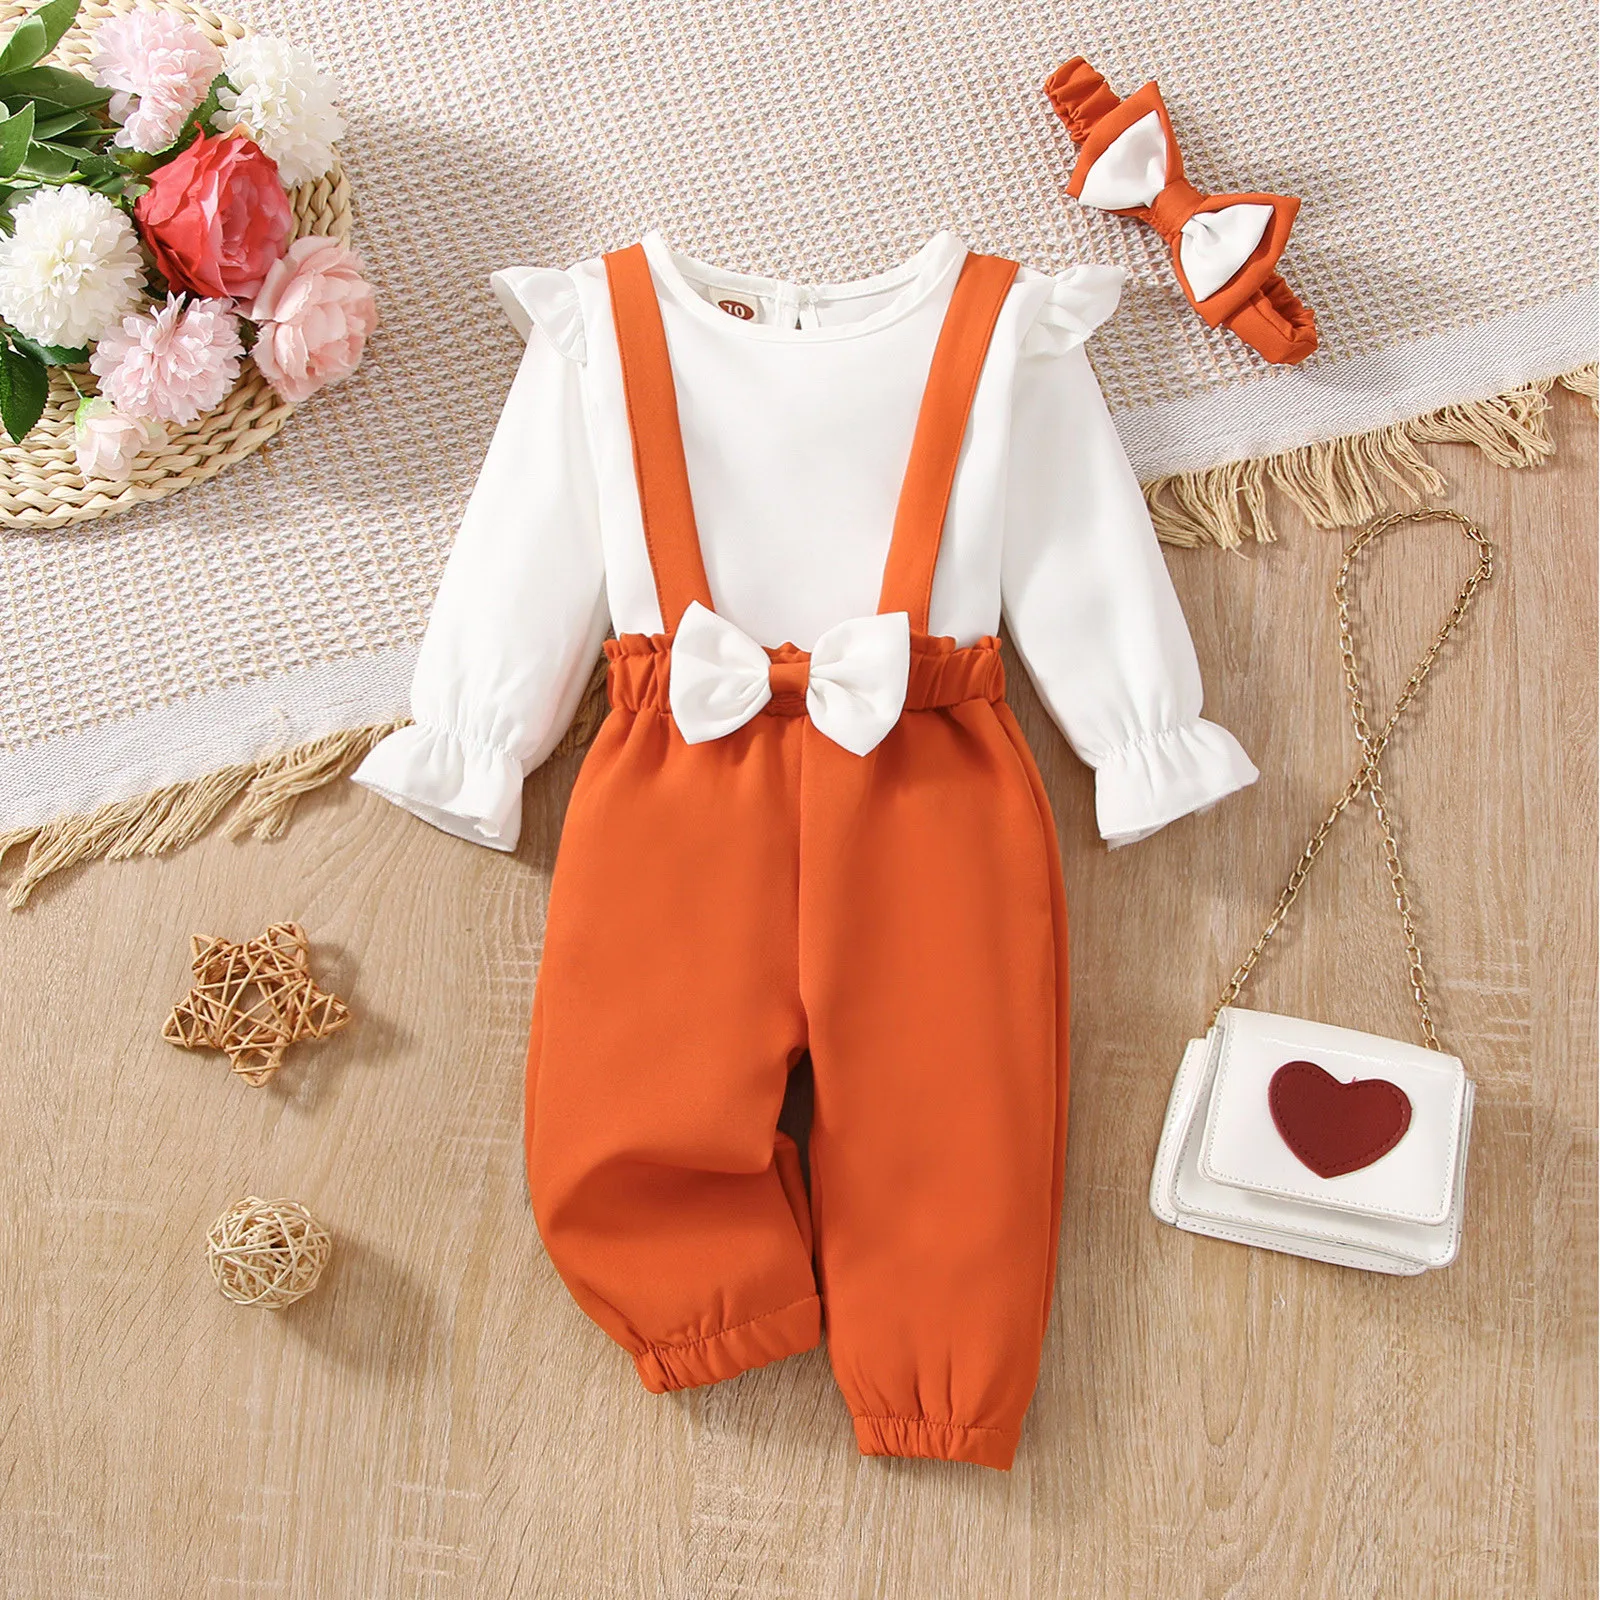 

Newborn Infant Baby Girls Clothes Sets Spring Autumn Long Ruffle Sleeve Tops+Bow Tie Suspender Pants+Headbands Sets 3Pcs Clothes